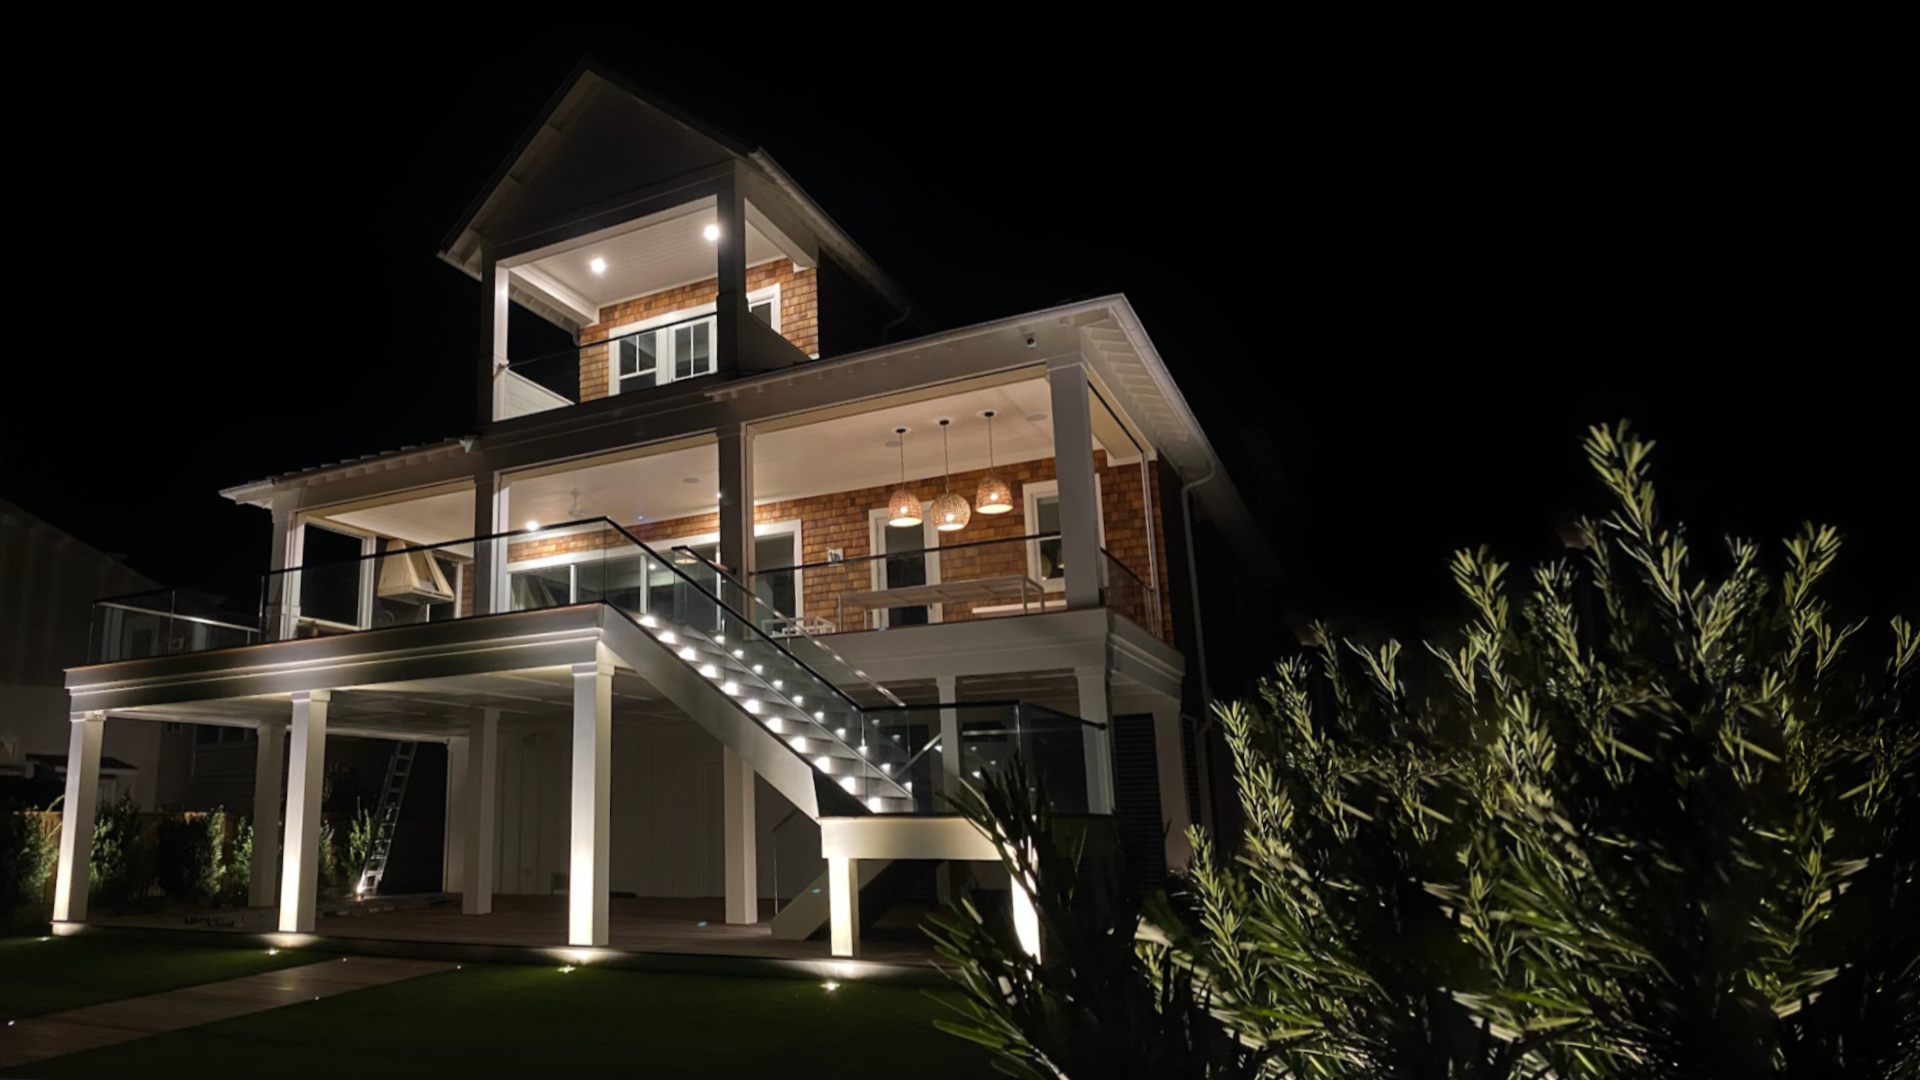 Outdoor landscape lighting on a house